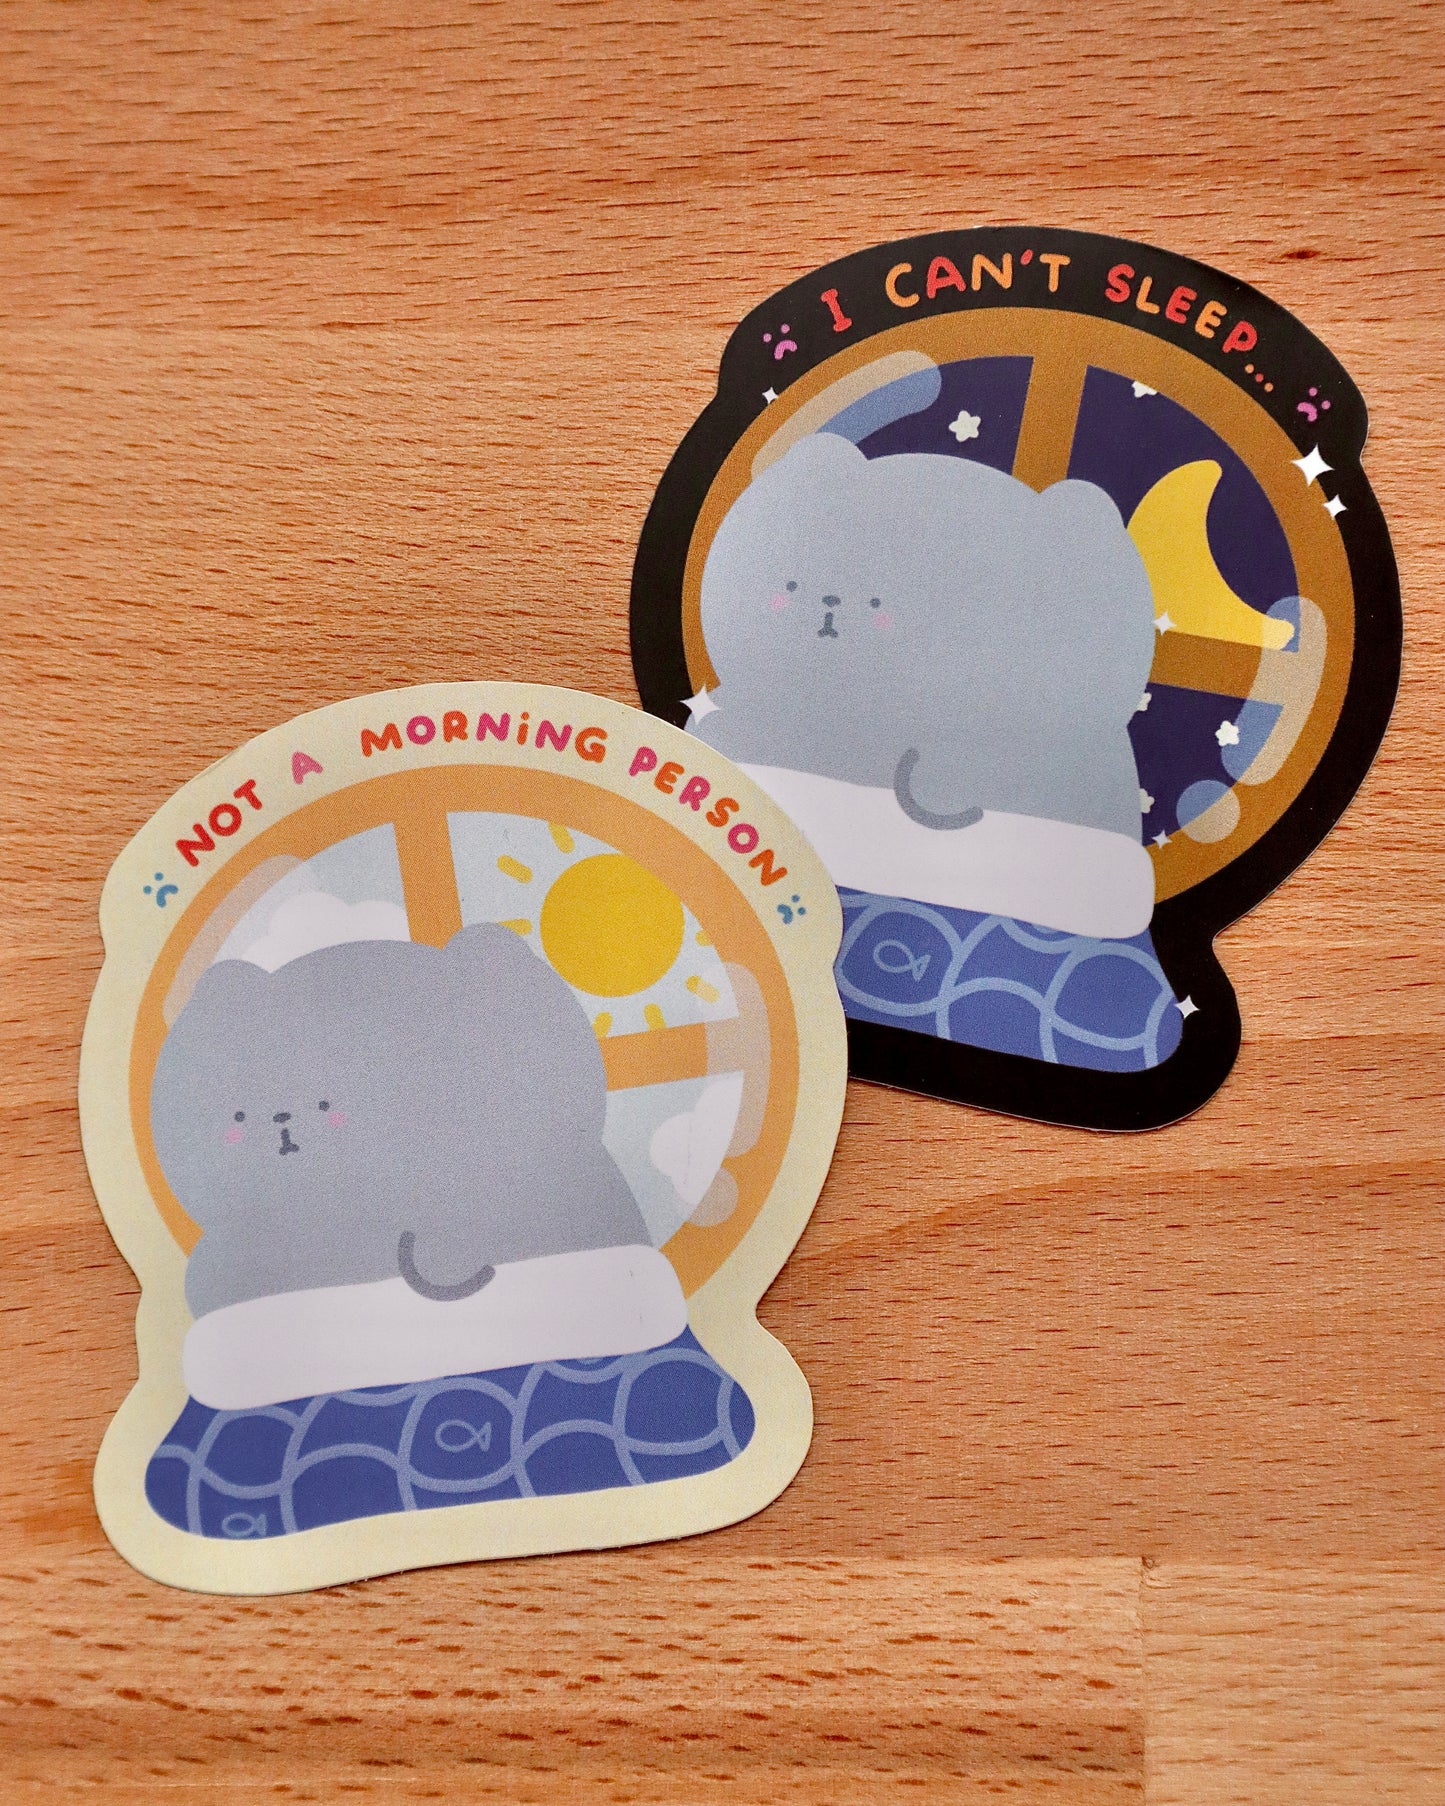 Pippin Not A Morning Person Die-Cut Sticker